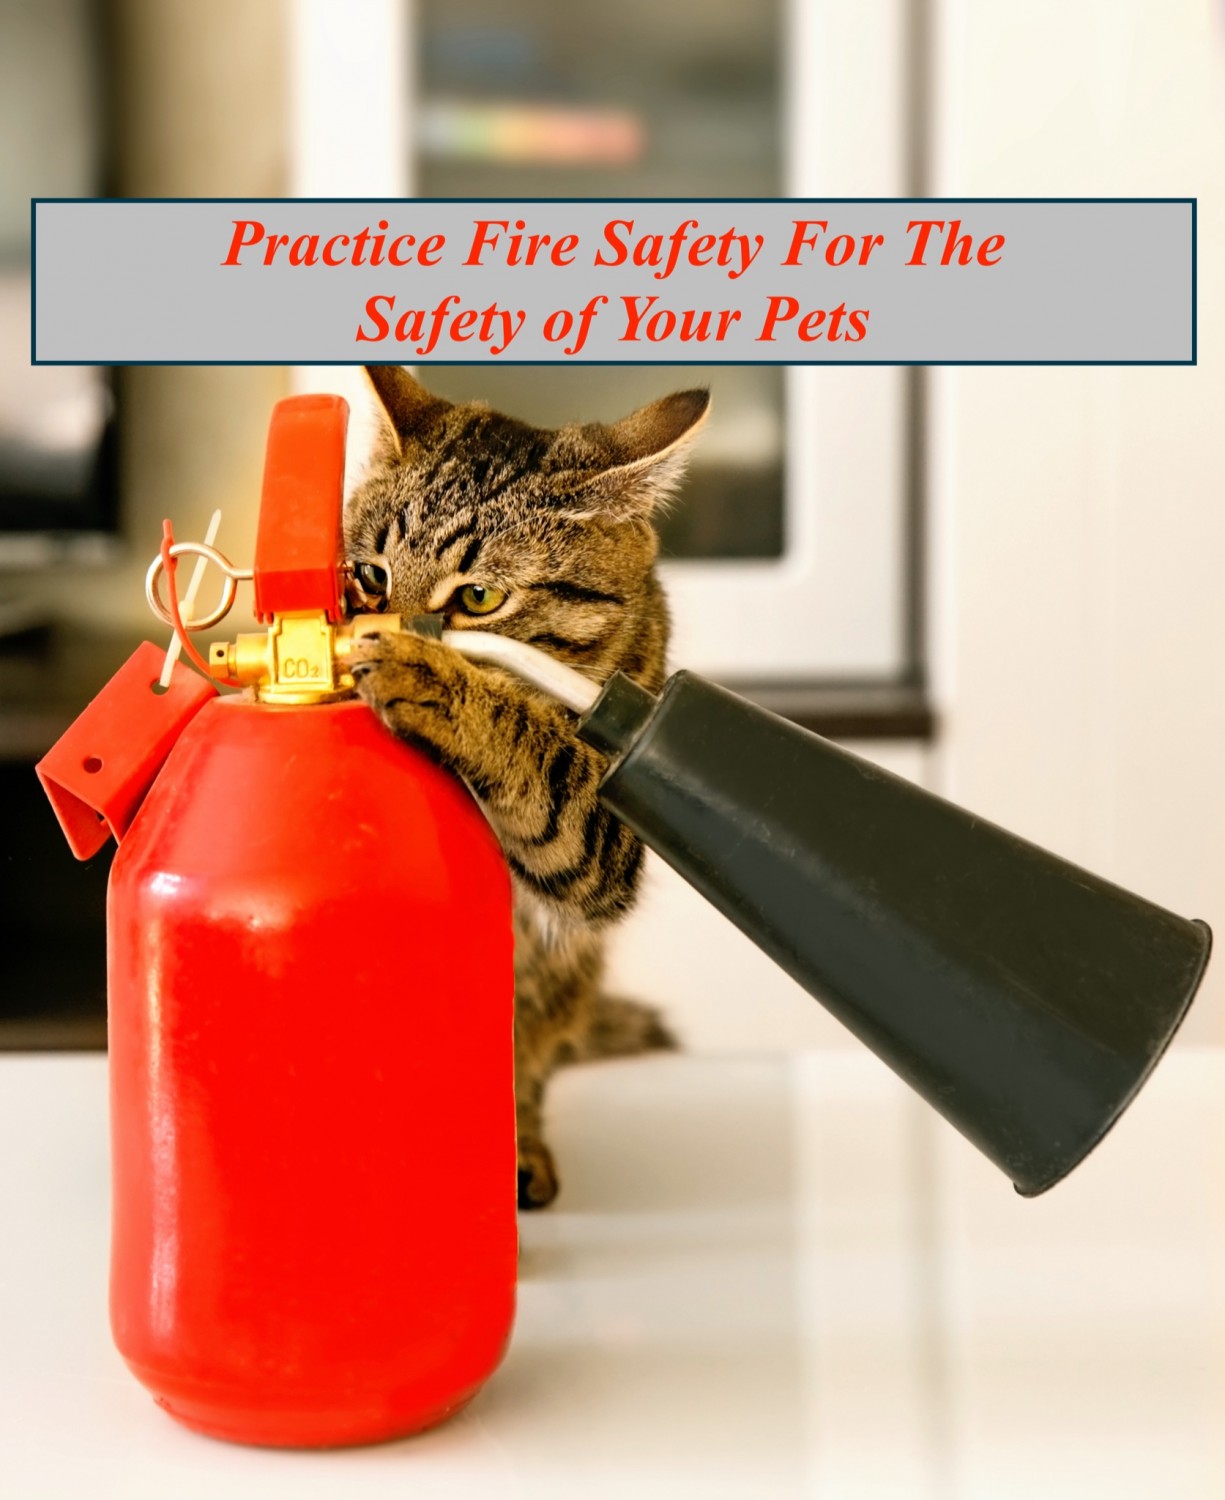 Fire Safety For Your Pets and Family